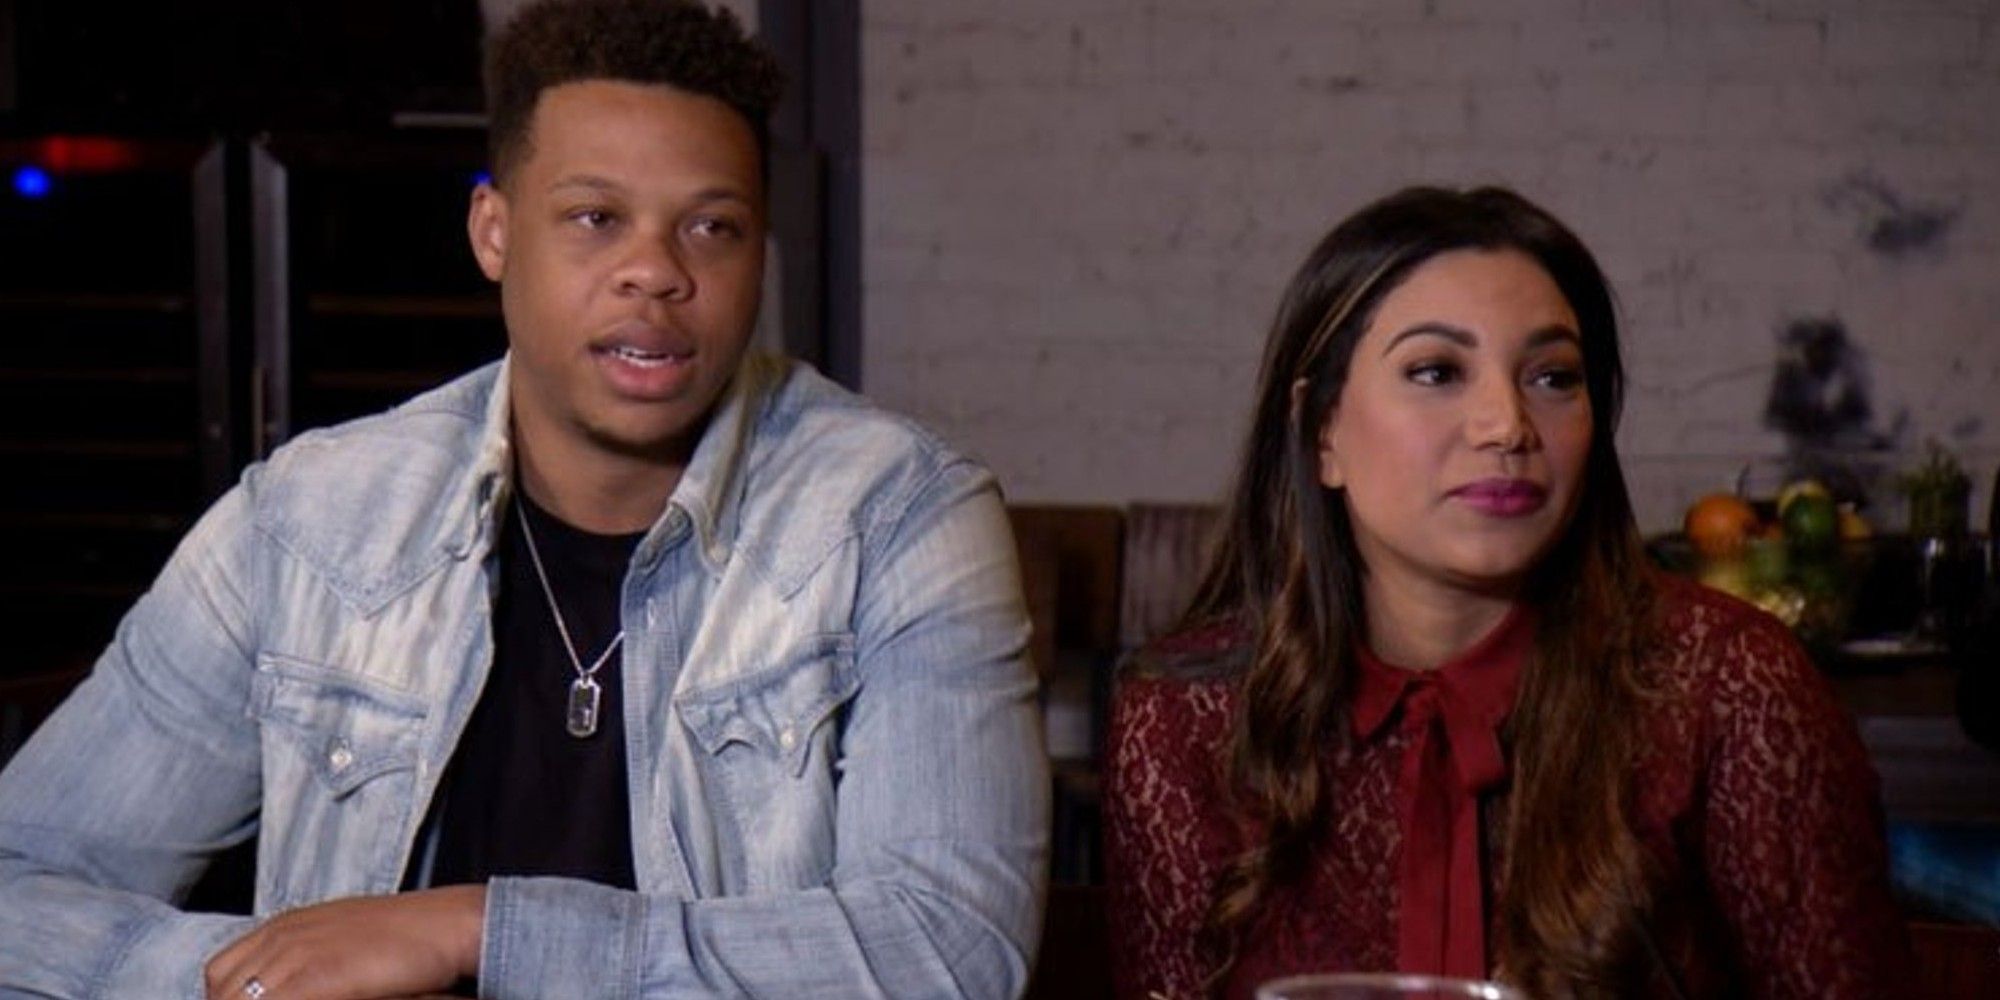 Mia Bally and Tristan Thompson from Married at First Sight season 7